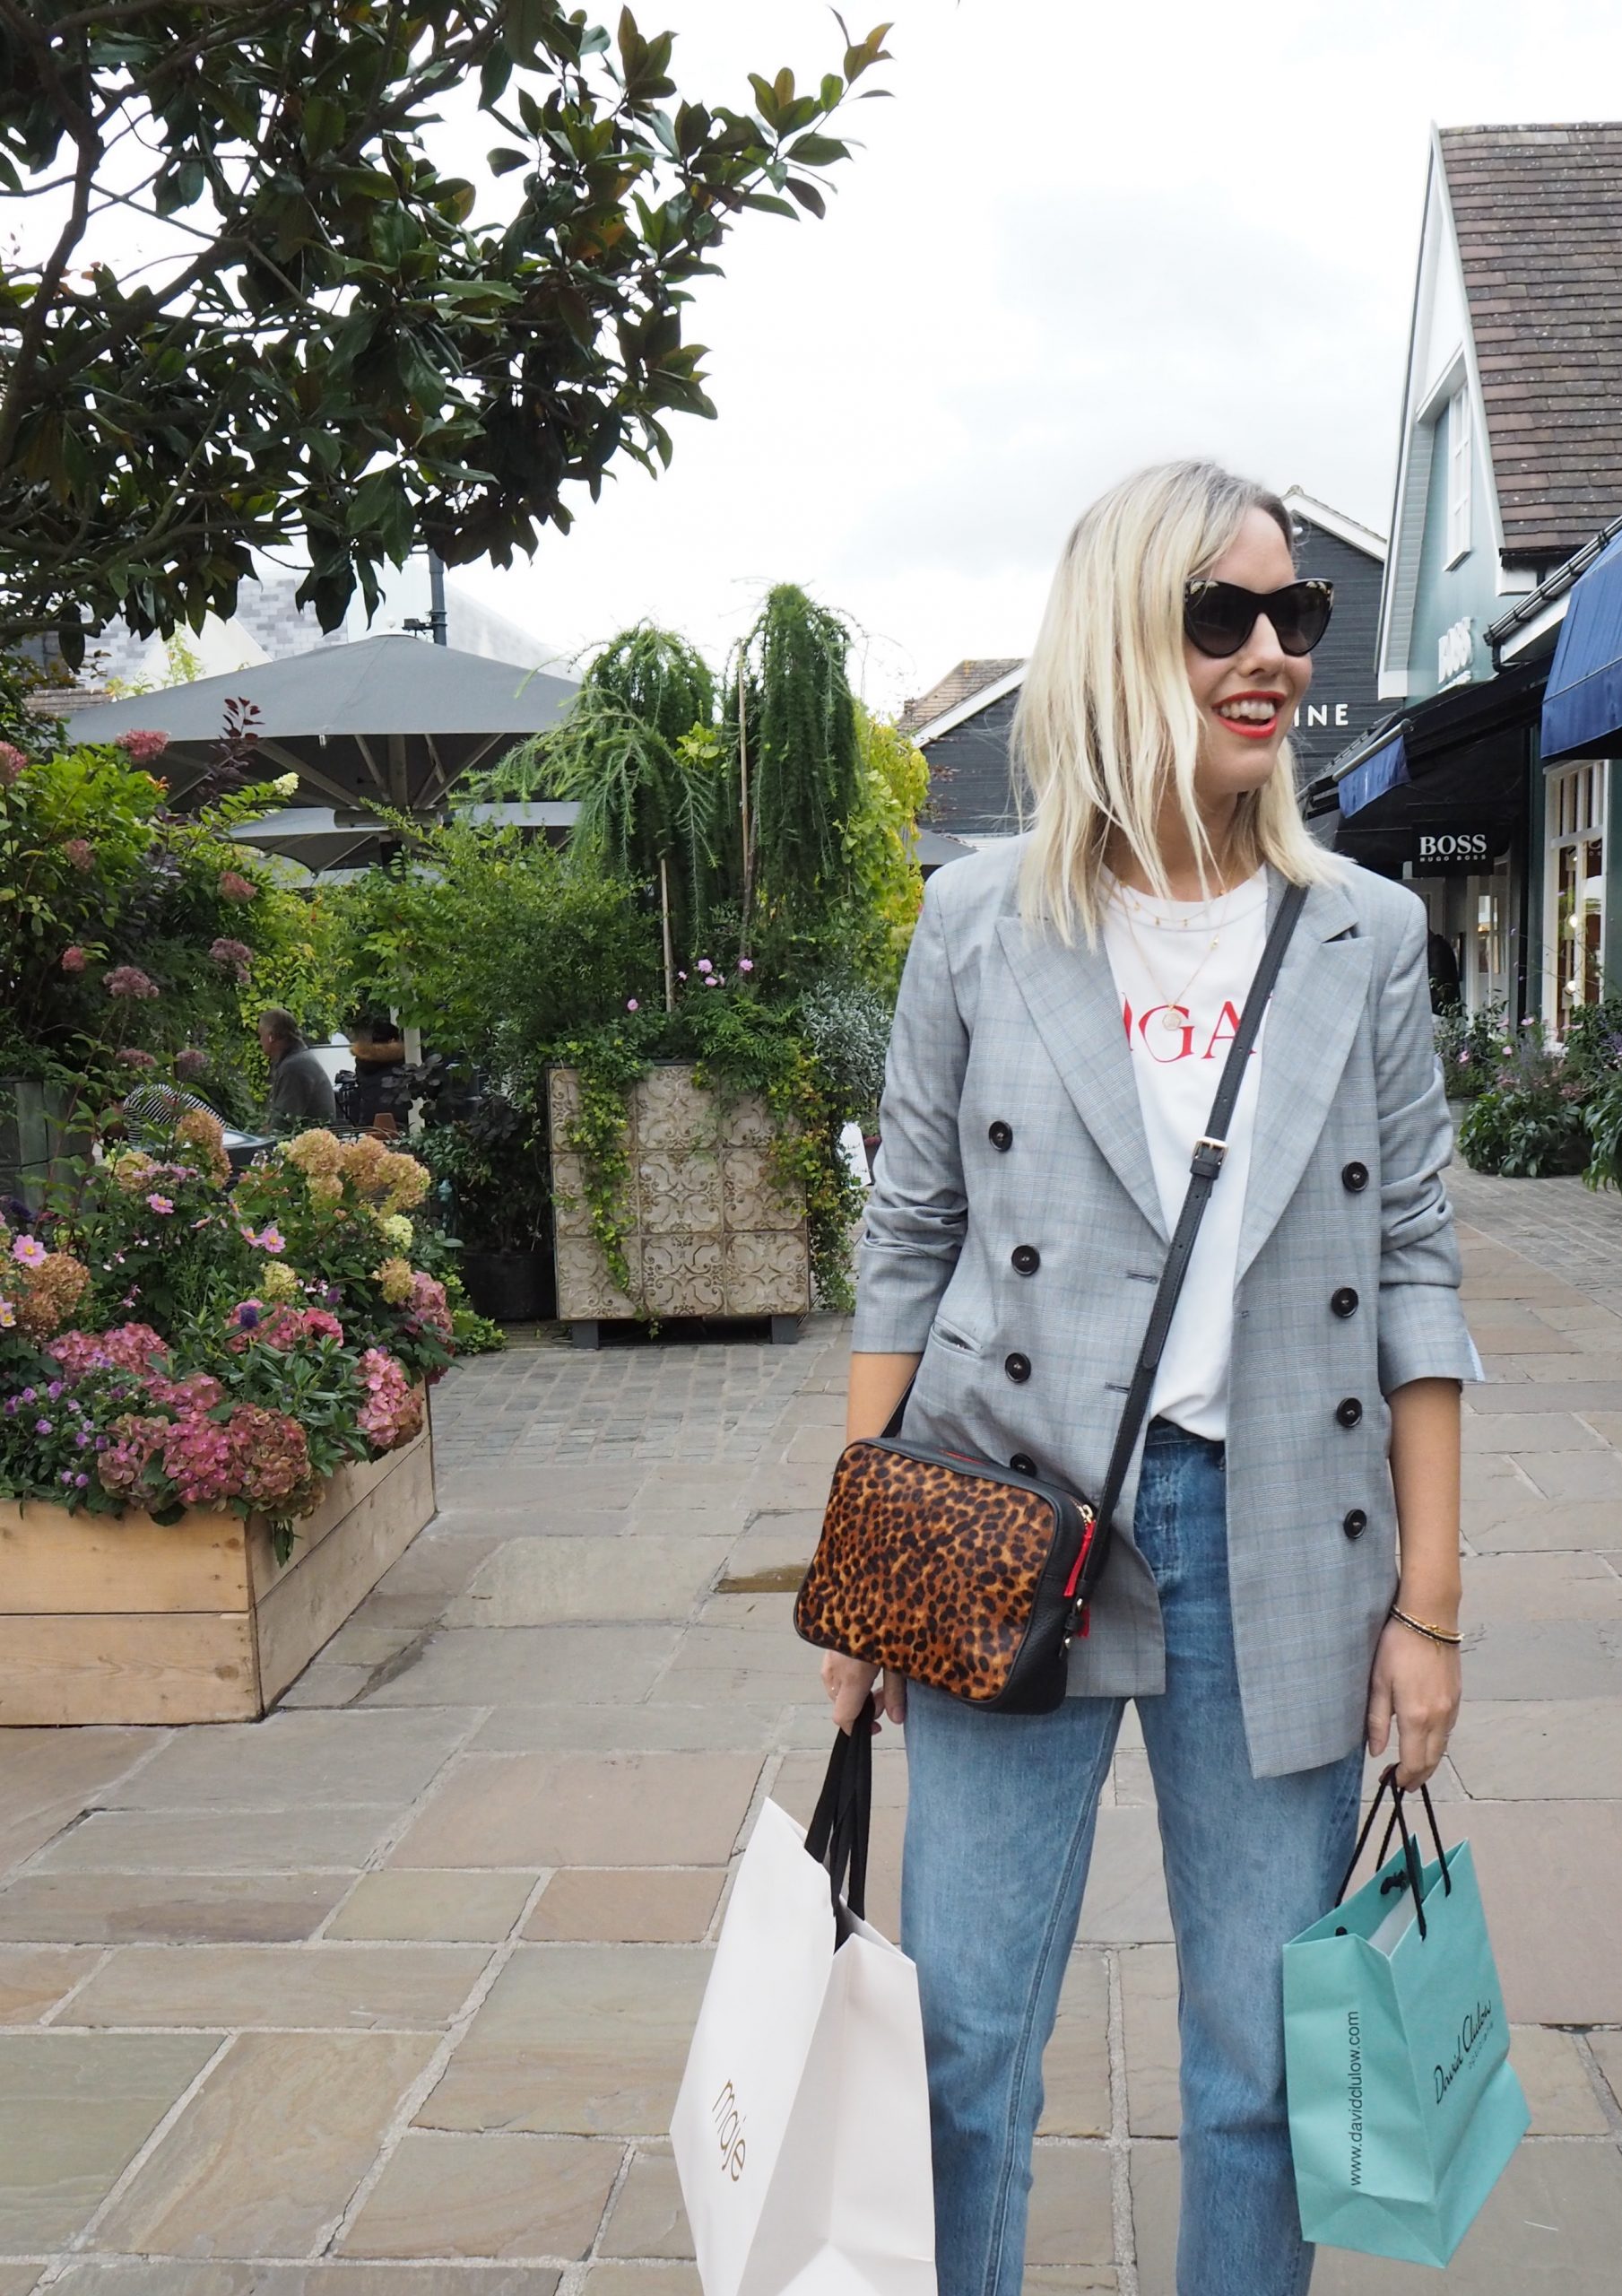 How to shop Bicester Village like a pro…